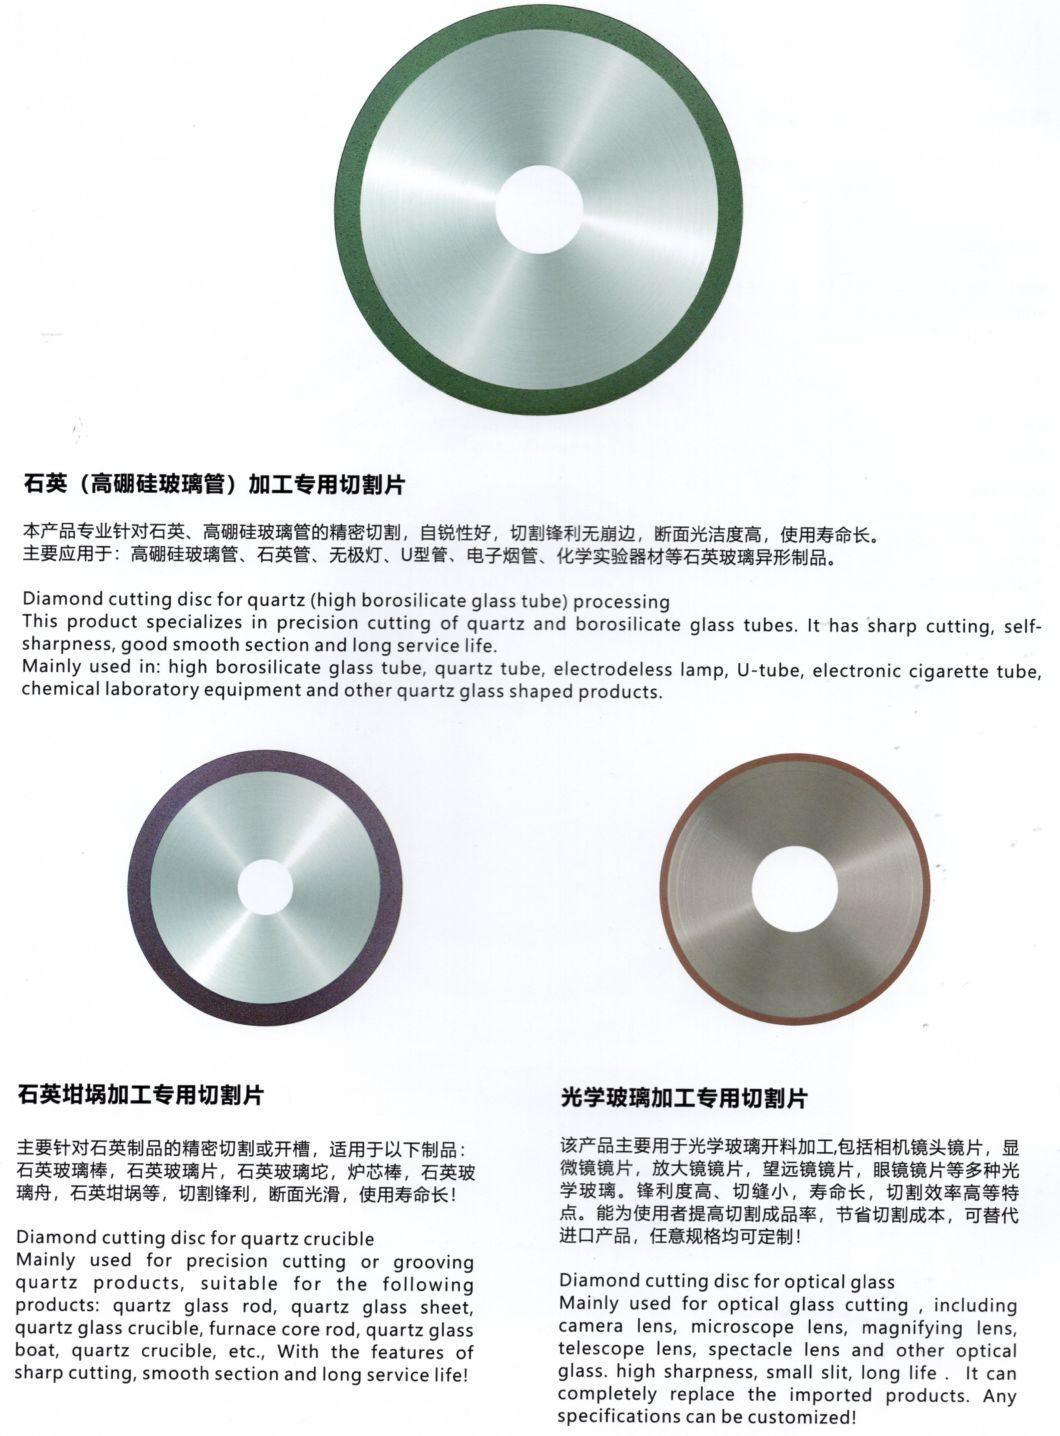 Metal Bonded Diamond Cutting Disc for Optical Glass